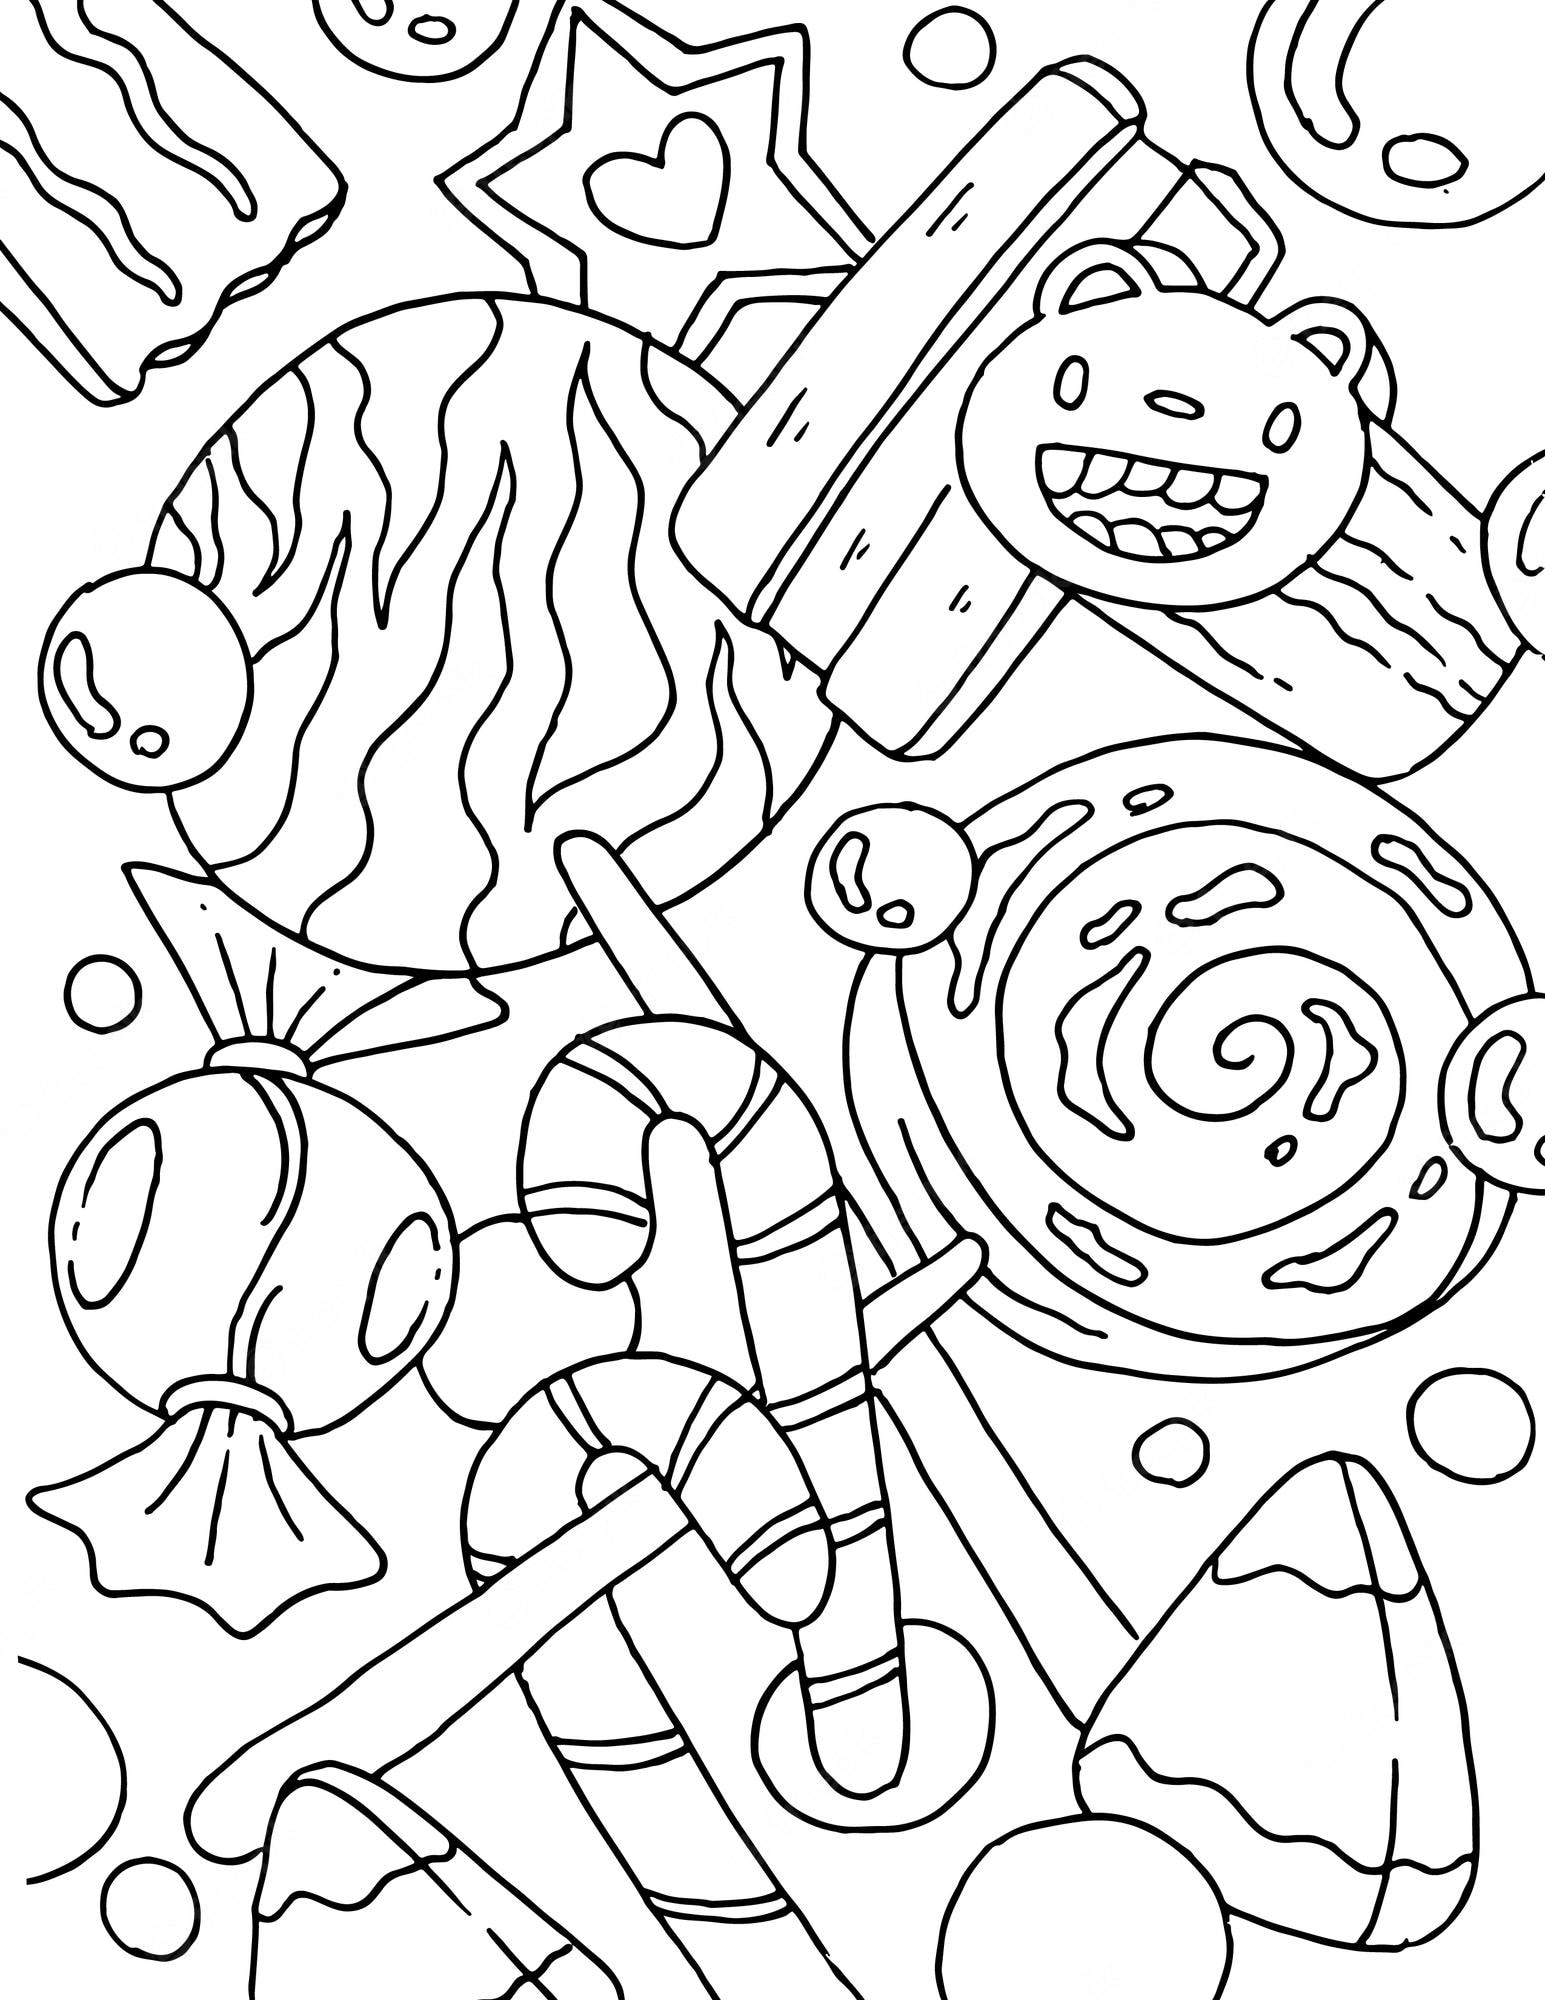 Premium Vector | Candy food doodle coloring page